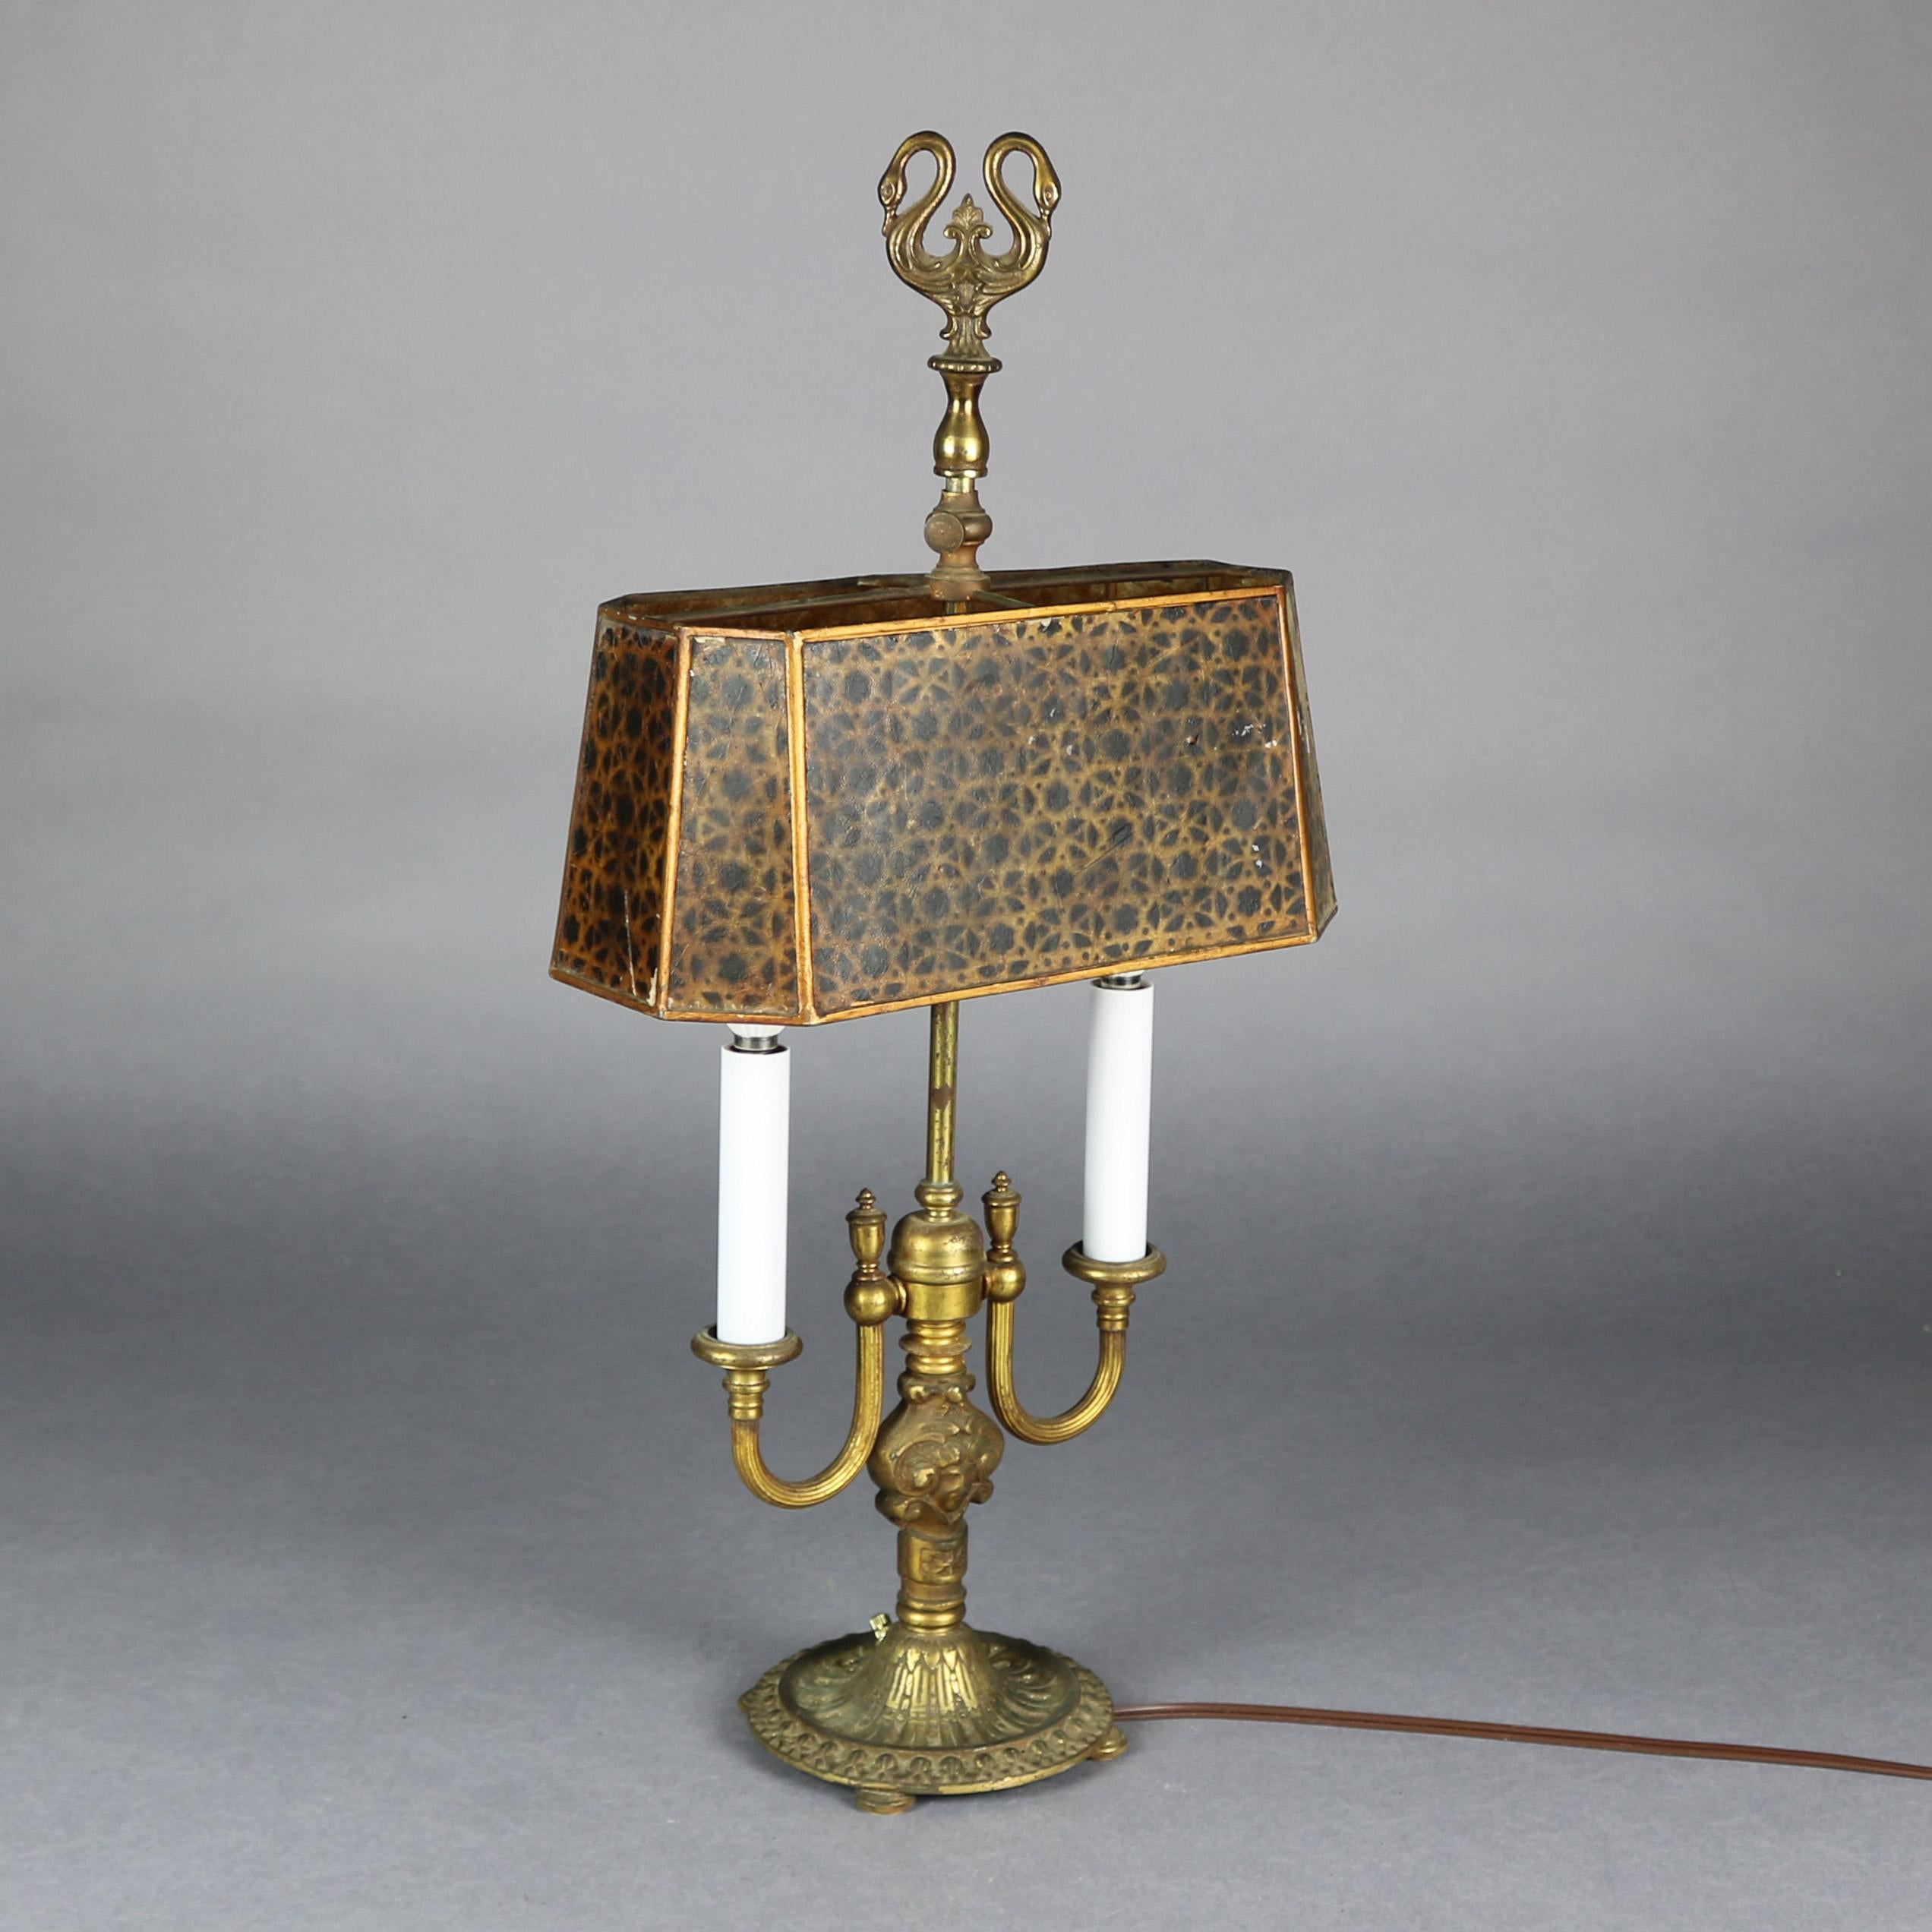 Cast Antique Rembrandt Bronze Bouillotte Table Lamp with Mica Shade, circa 1920